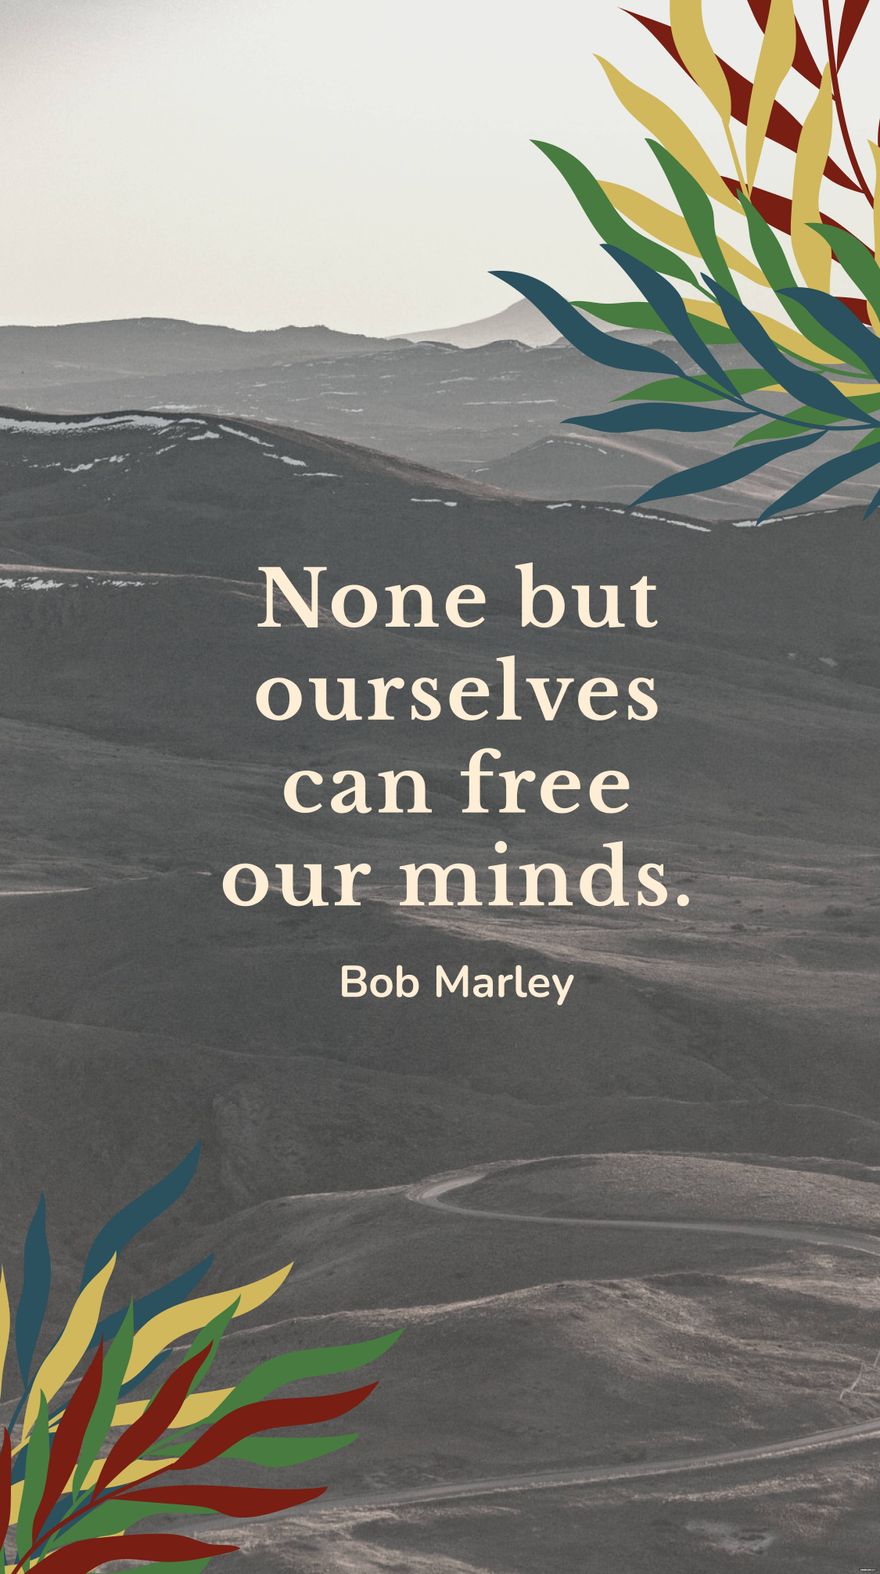 Bob Marley - None but ourselves can our minds.